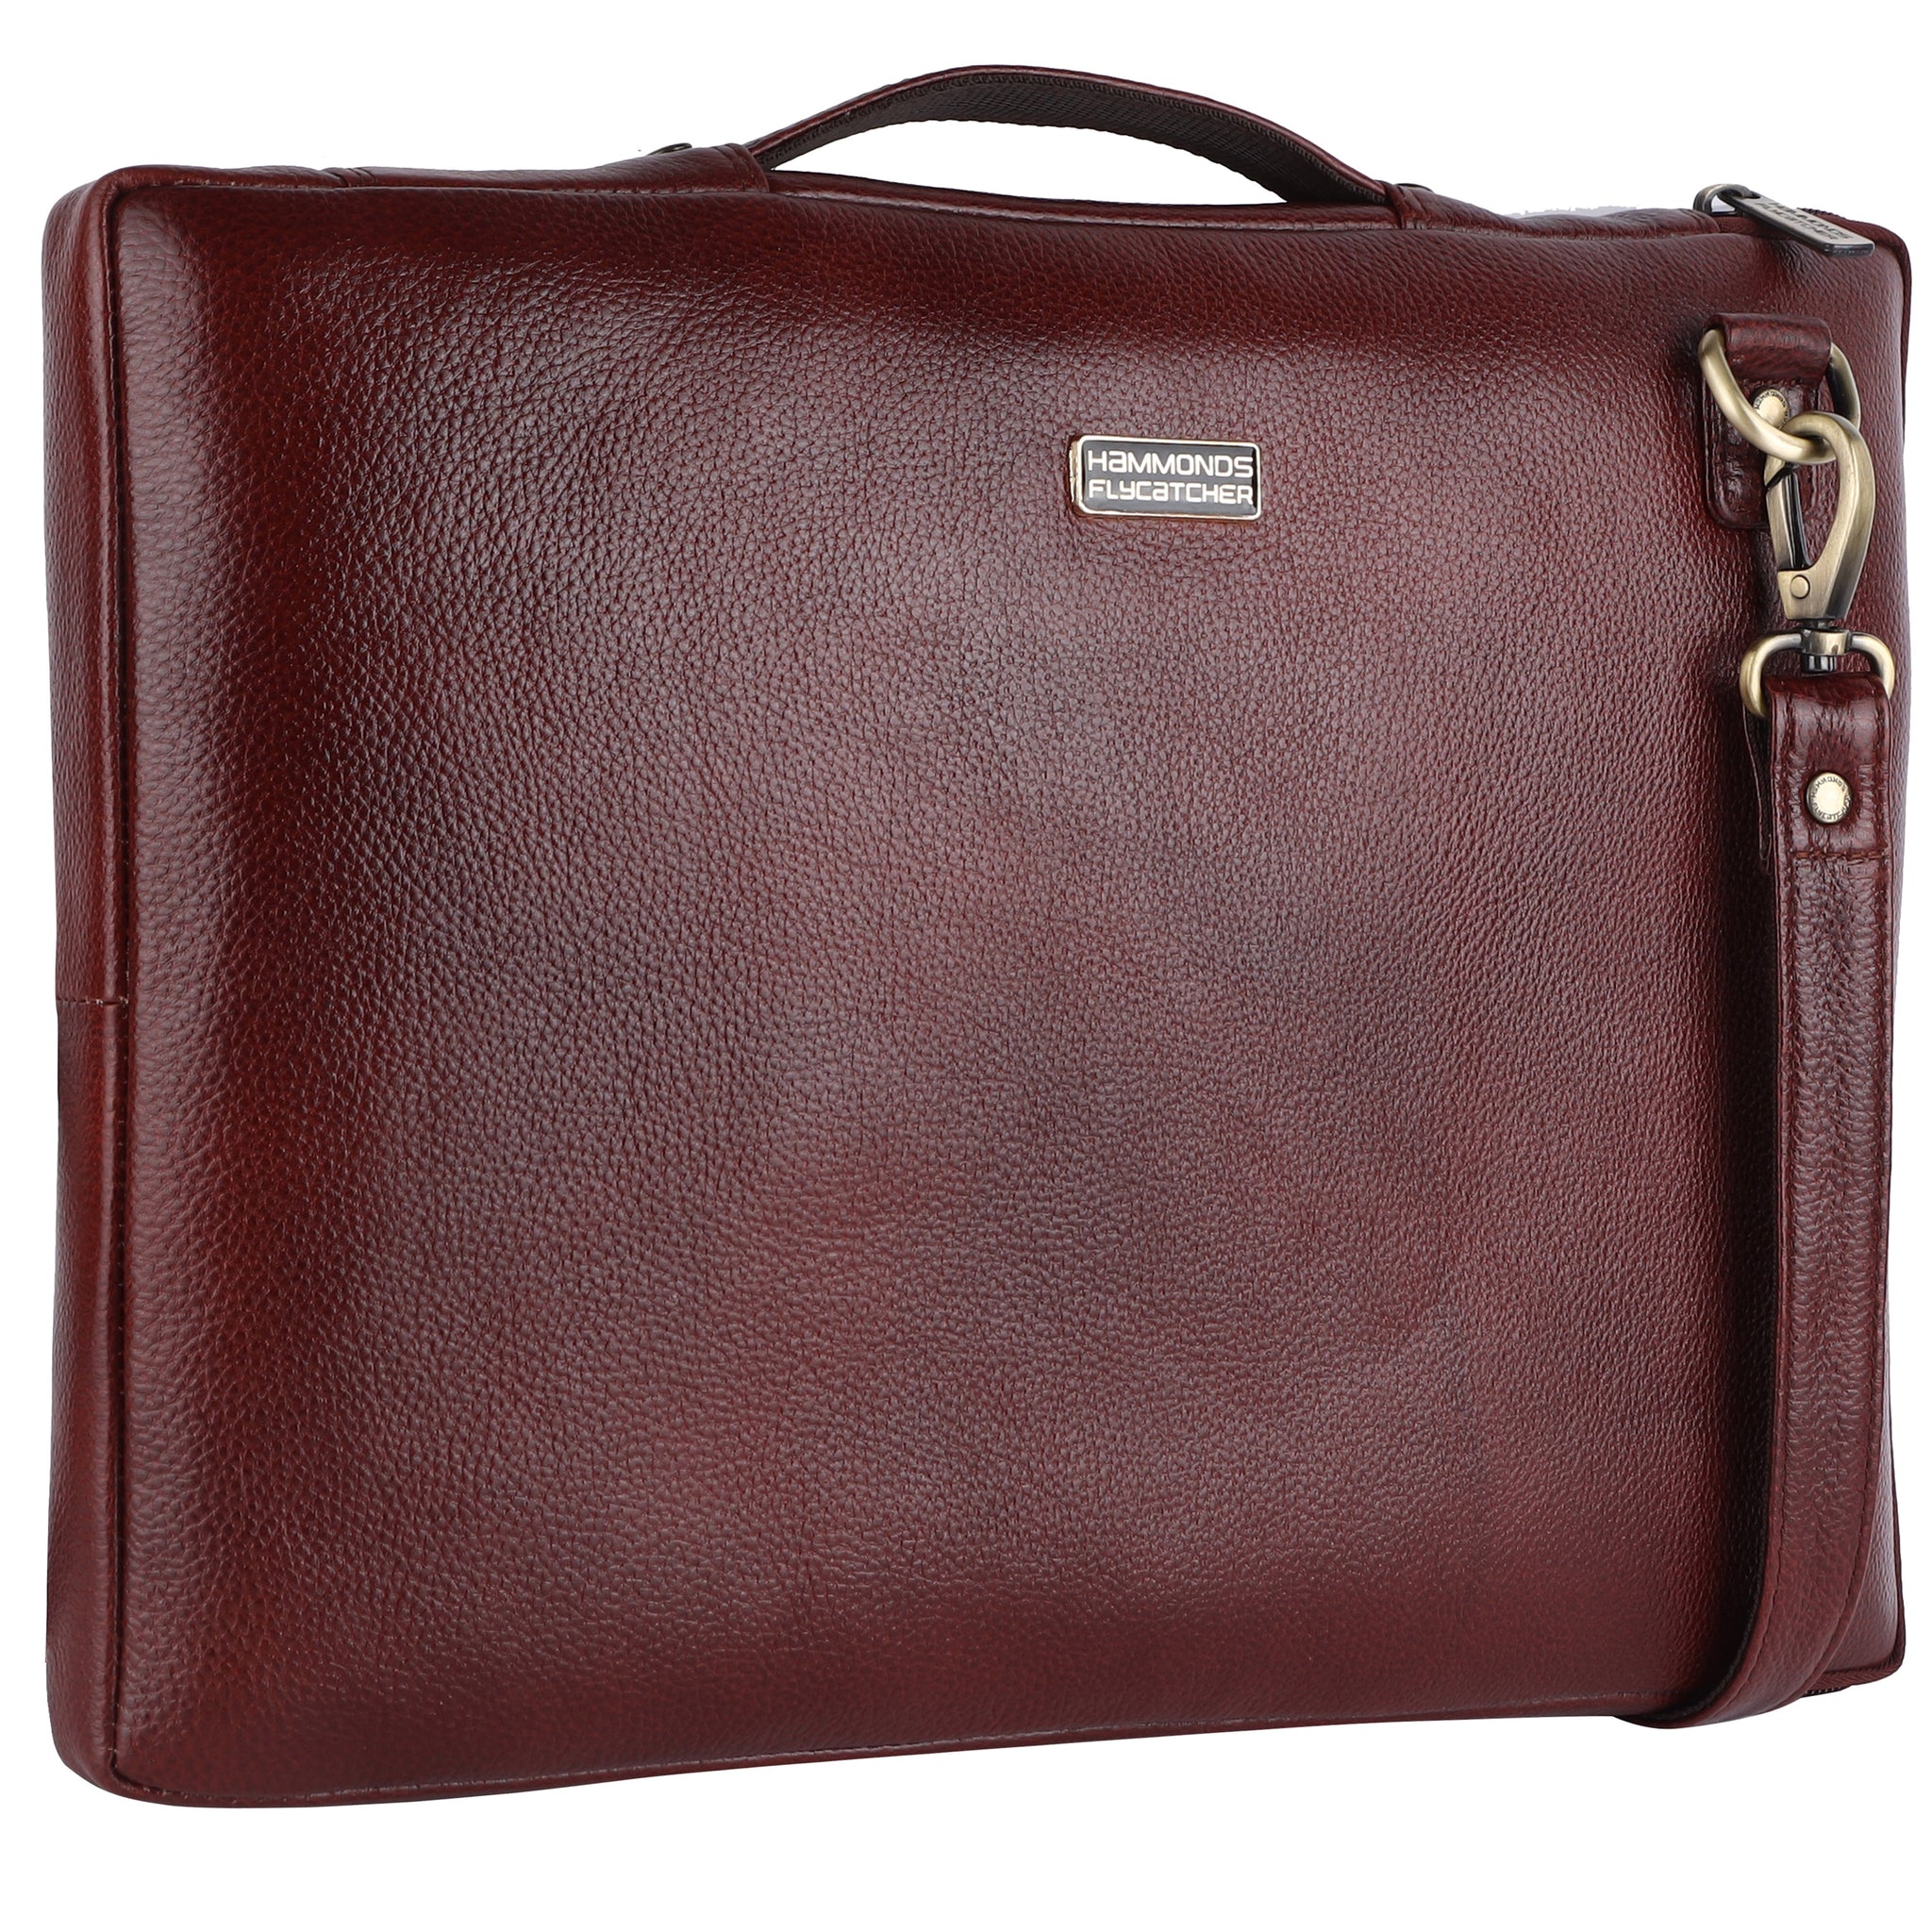 Genuine Leather Stylish Slim Laptop Sleeve Bag - Fits up to 15.6 Inch Laptop/MacBook